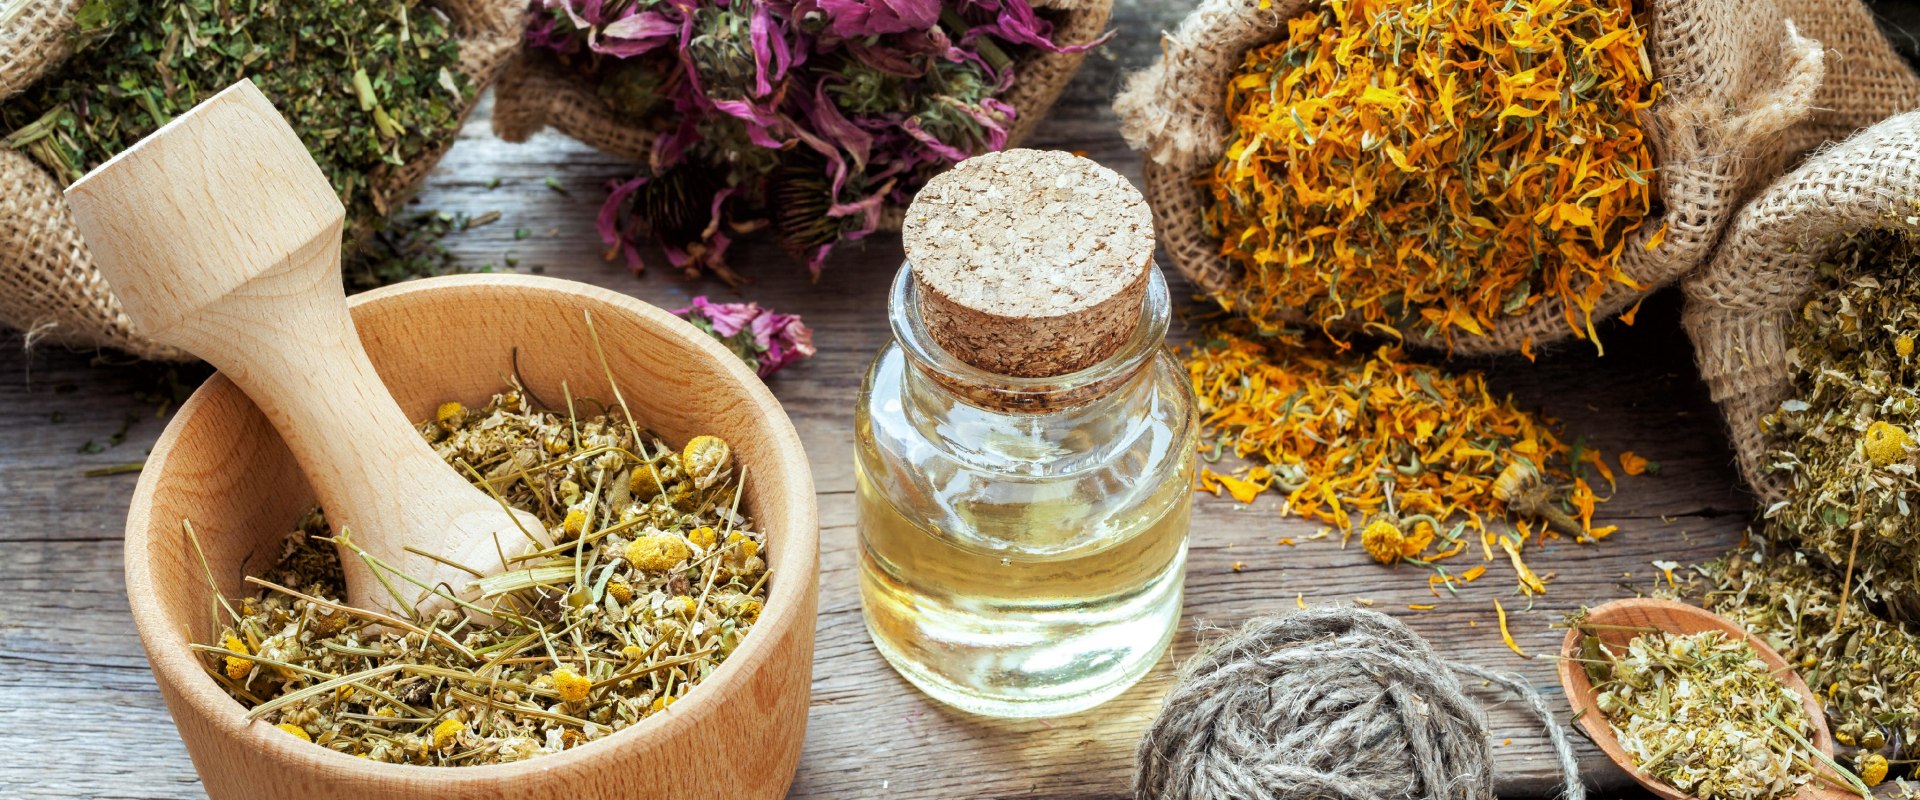 Herbal Remedies for Health Issues